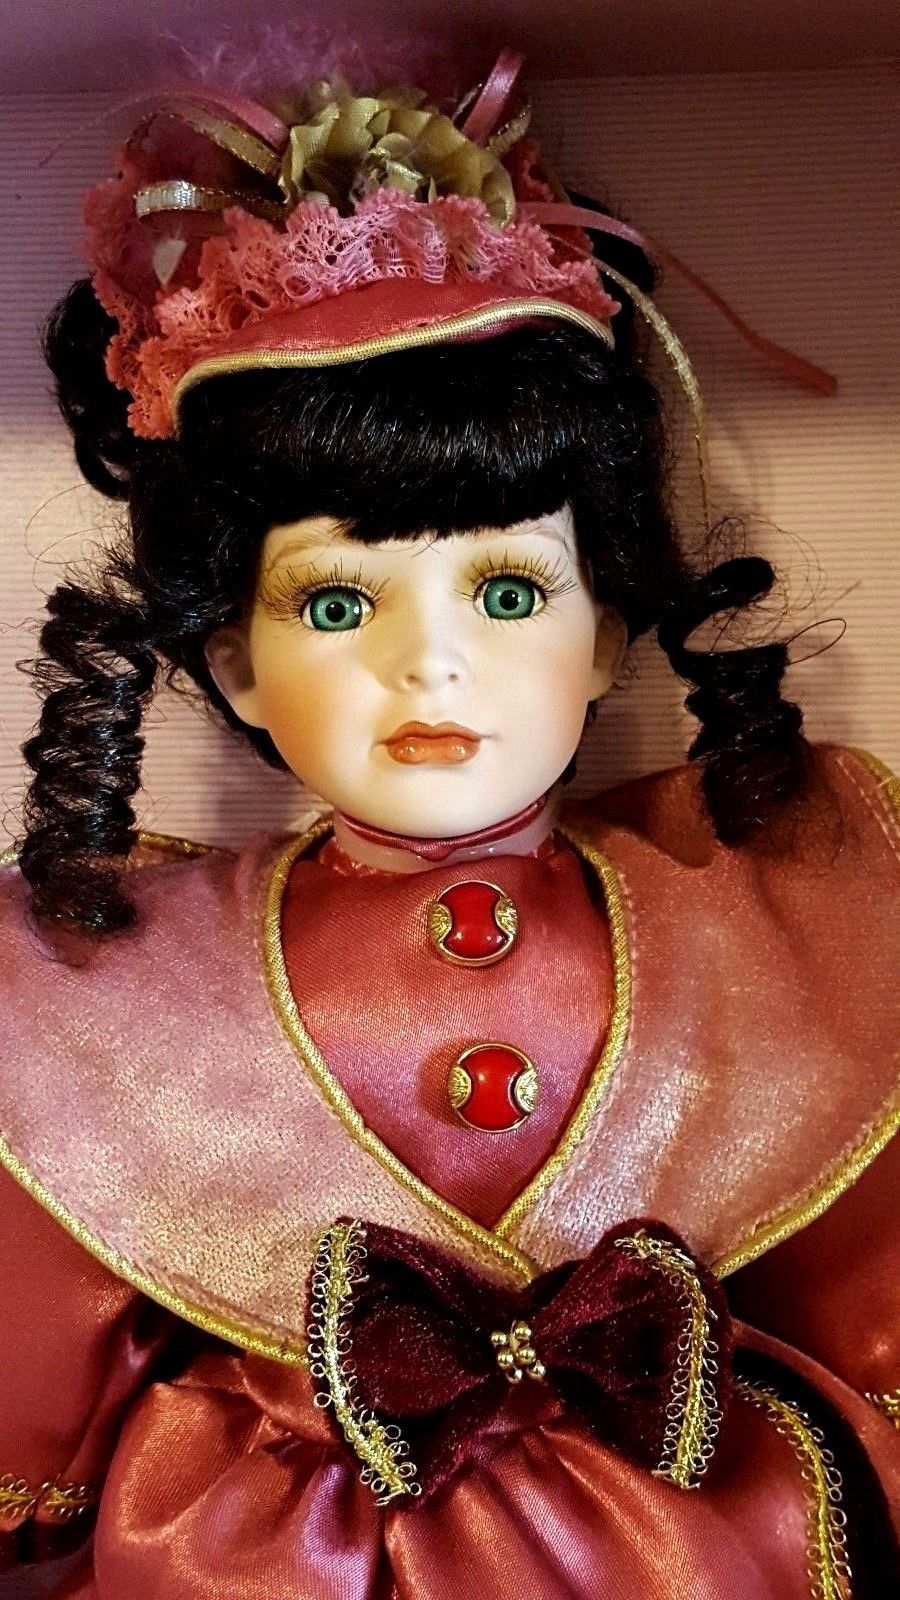 collectible memories porcelain dolls limited edition